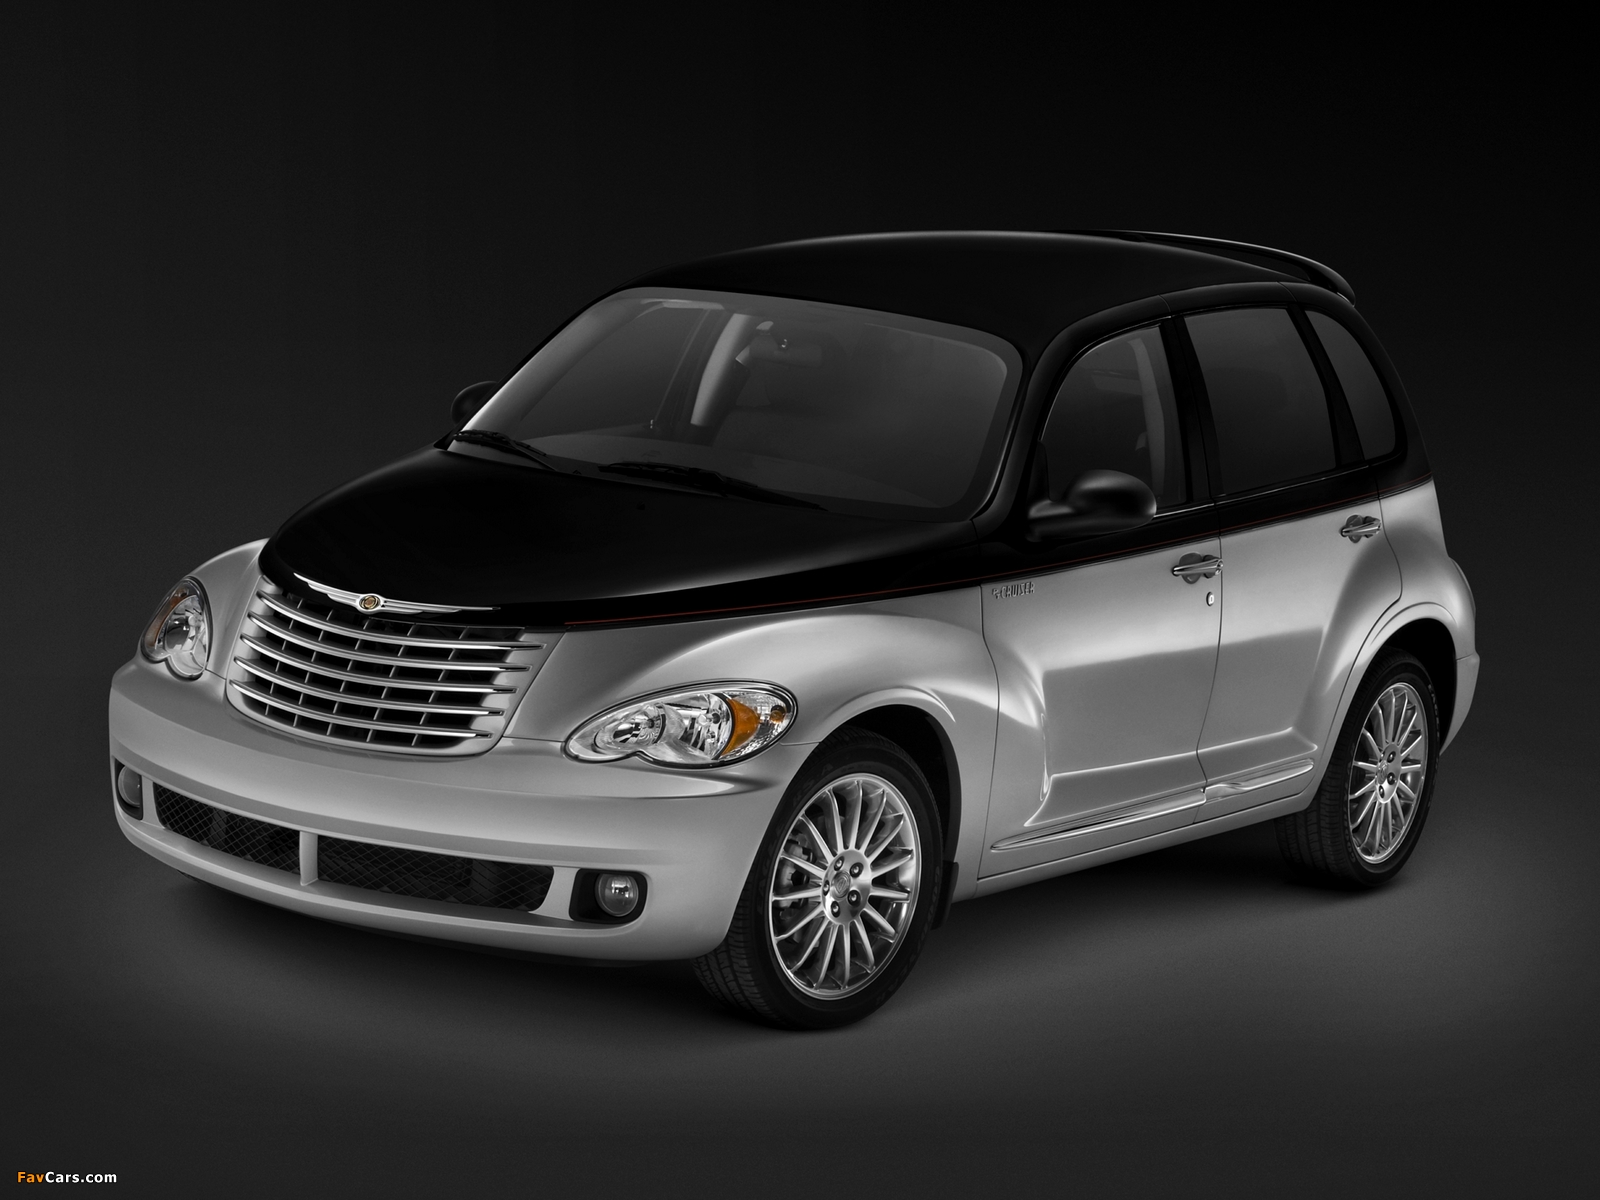 Chrysler PT Cruiser Couture Edition 2010 images (1600 x 1200)